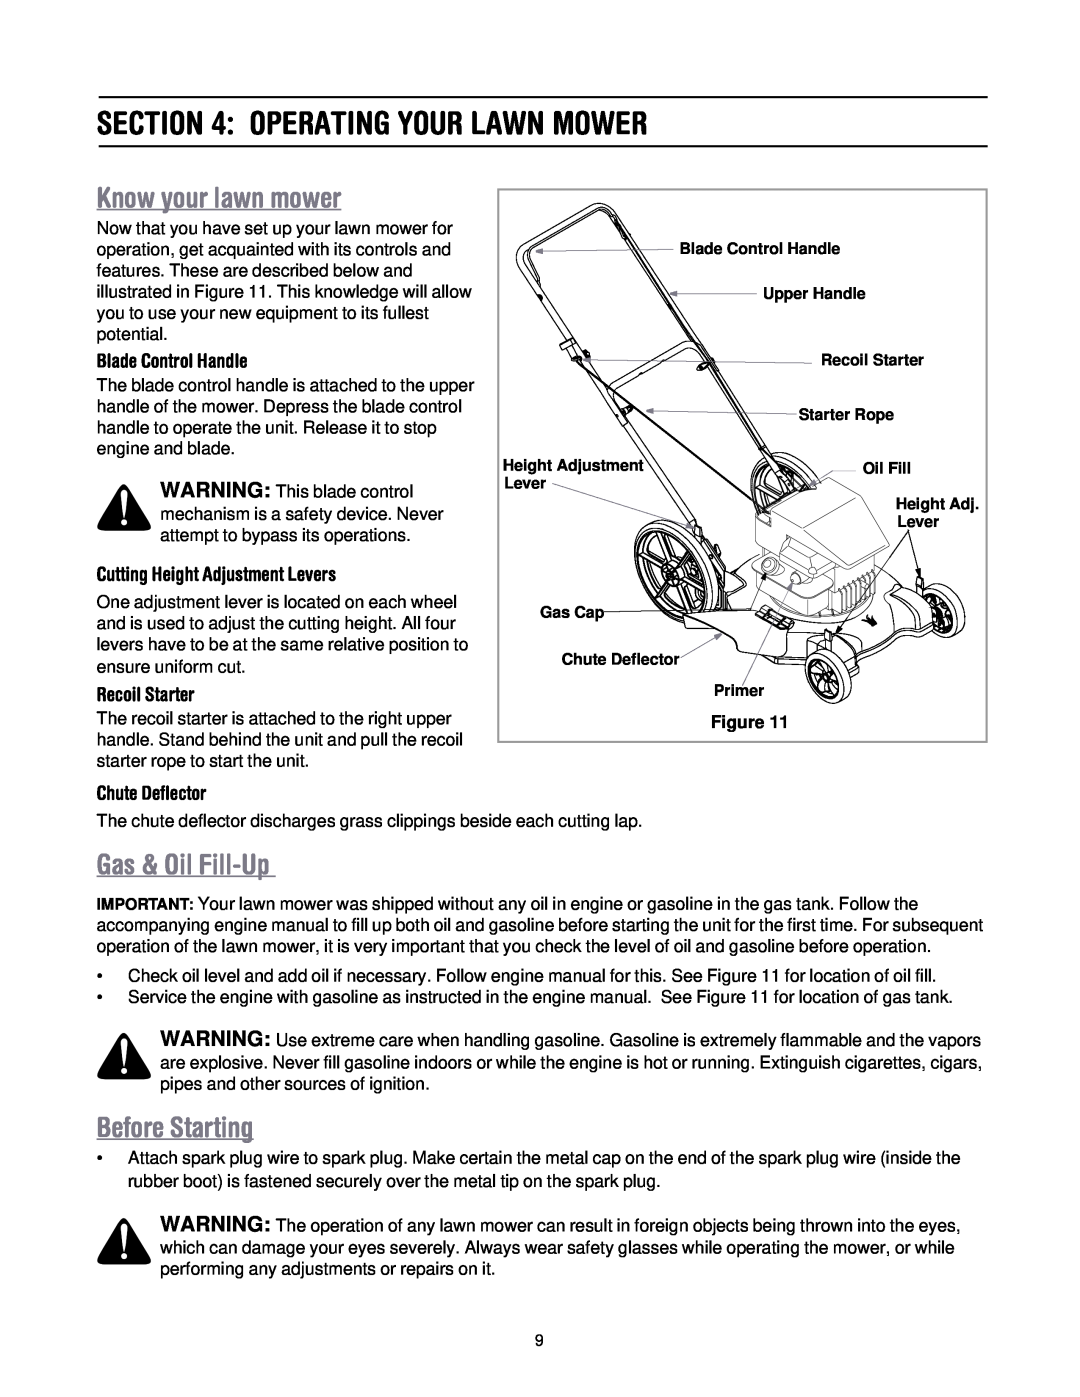 MTD 50 manual Operating Your Lawn Mower, Know your lawn mower, Gas & Oil Fill-Up, Before Starting, Blade Control Handle 